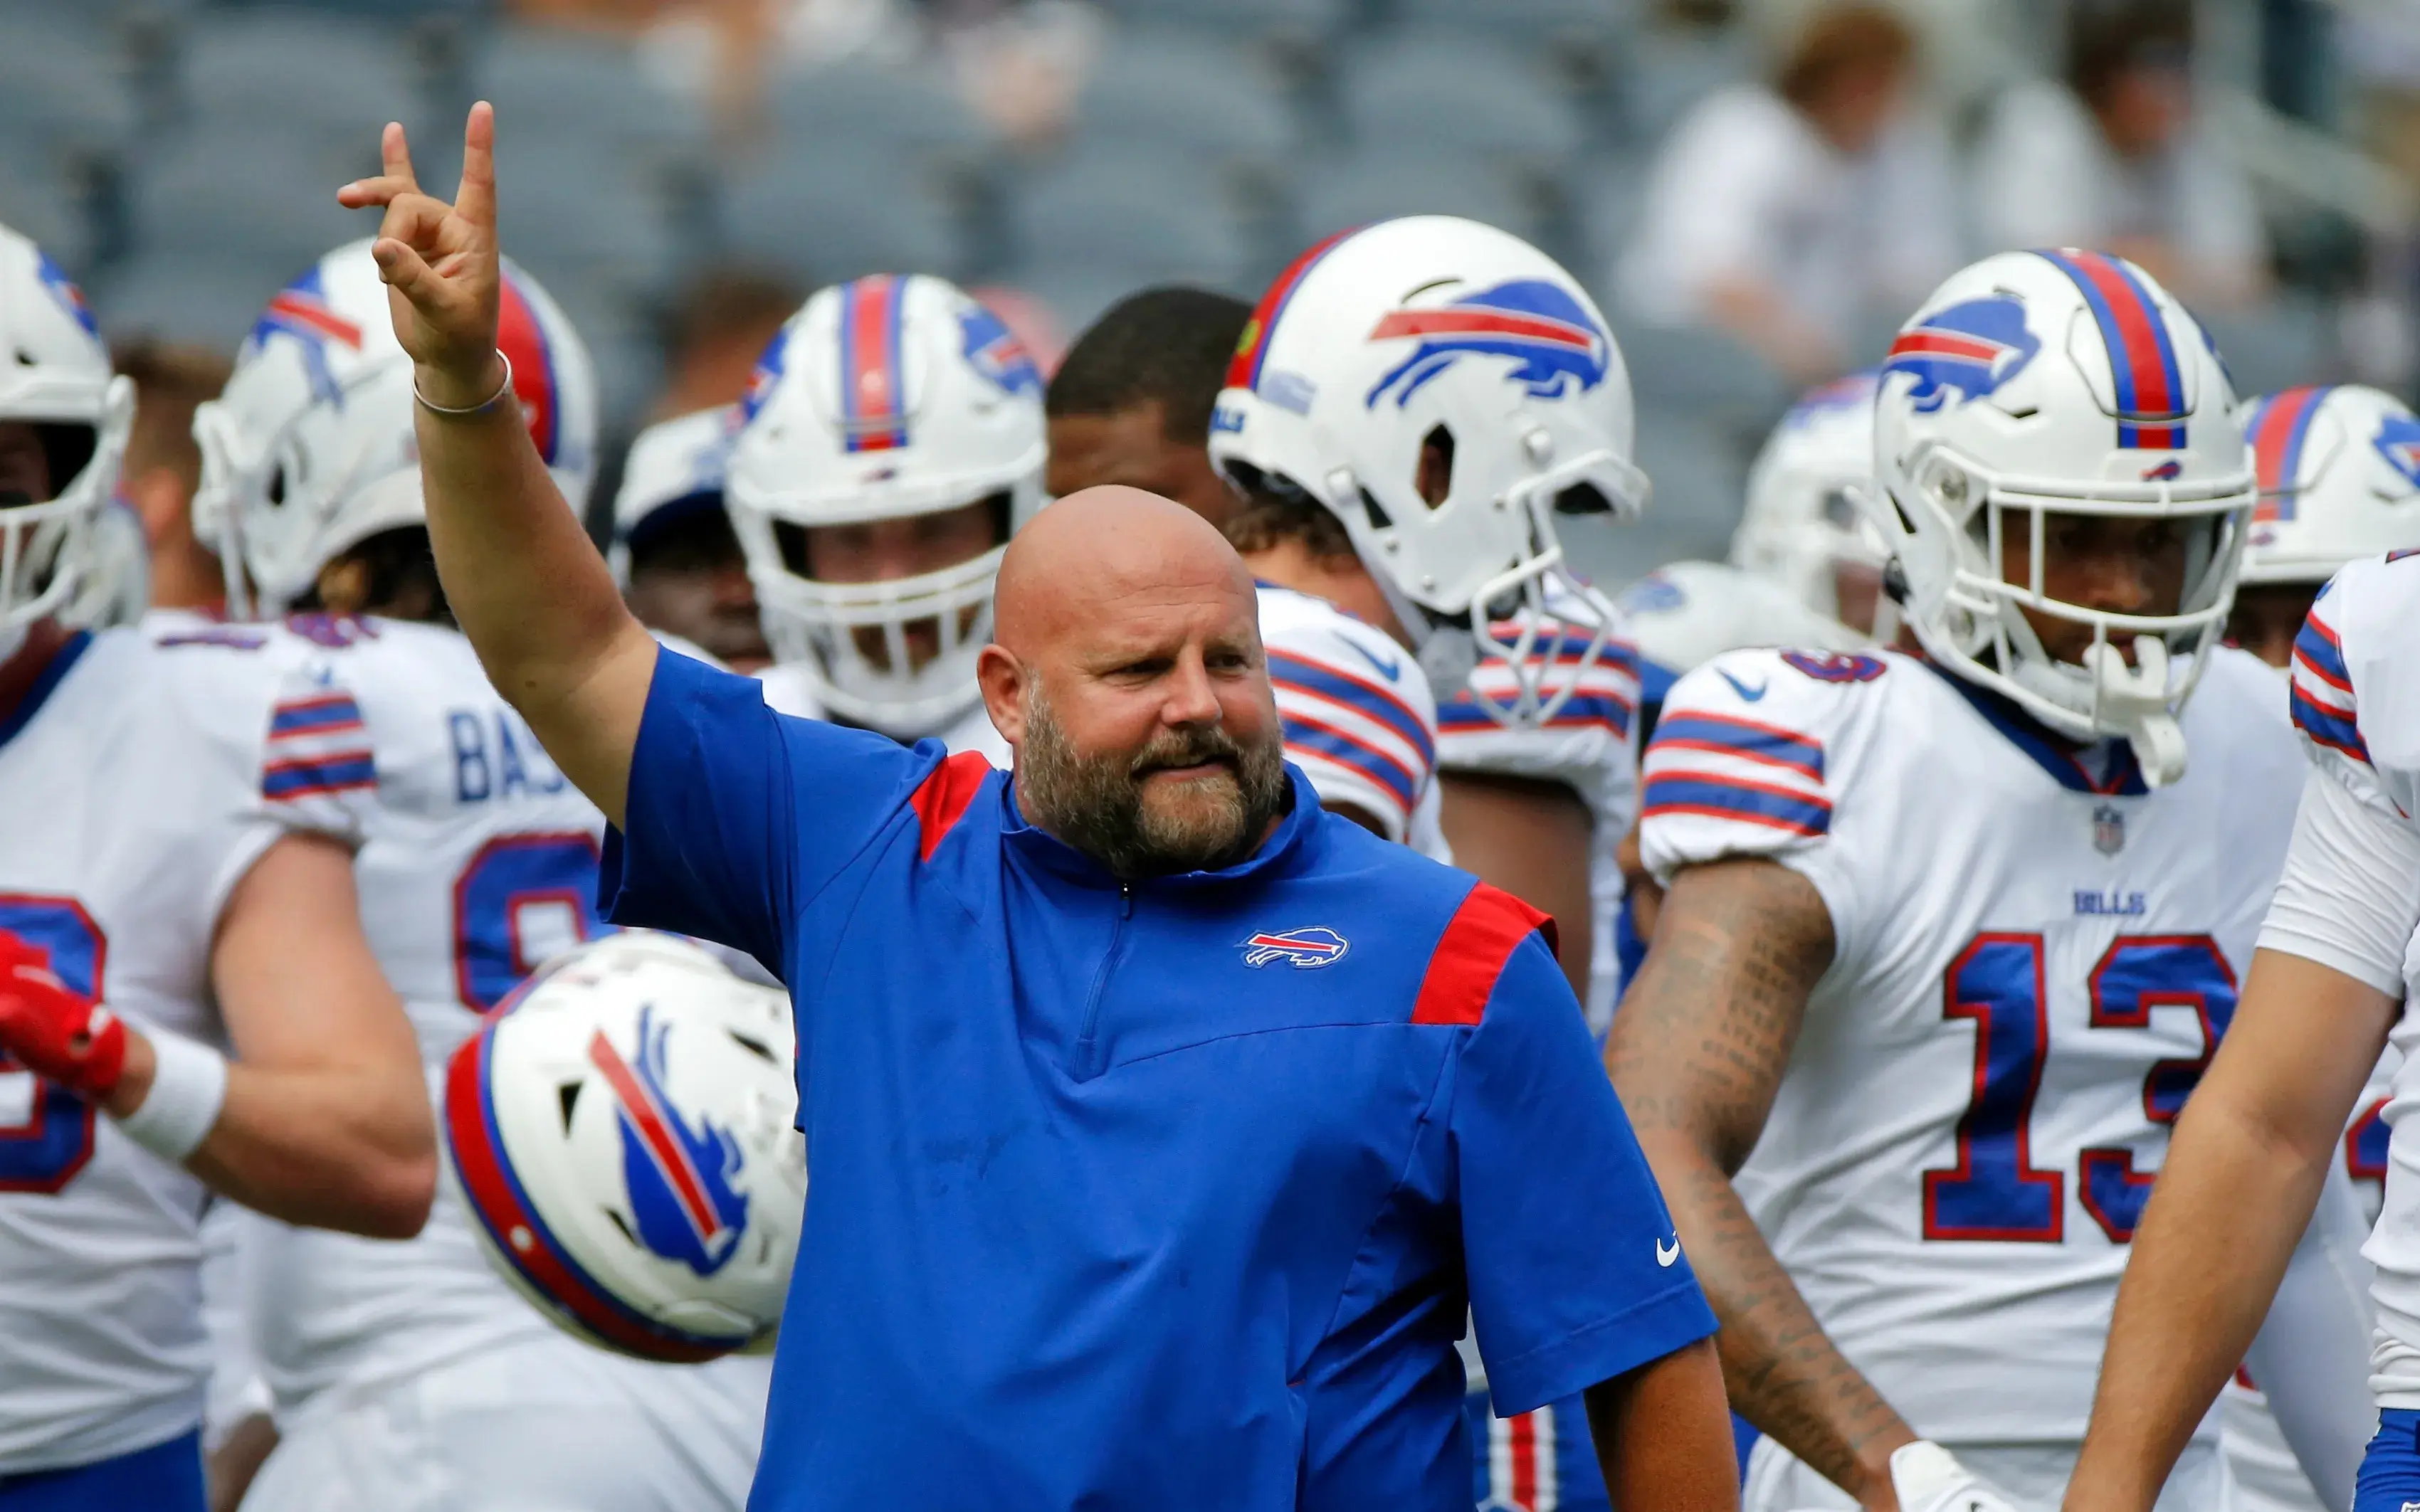 Aug 21, 2021; Chicago, Illinois, USA; Buffalo Bills offensive coordinator Brian Daboll gestures during warmups before the game against the Chicago Bears at Soldier Field. The Buffalo Bills won 41-15. Mandatory Credit: Jon Durr-USA TODAY Sports / © Jon Durr-USA TODAY Sports